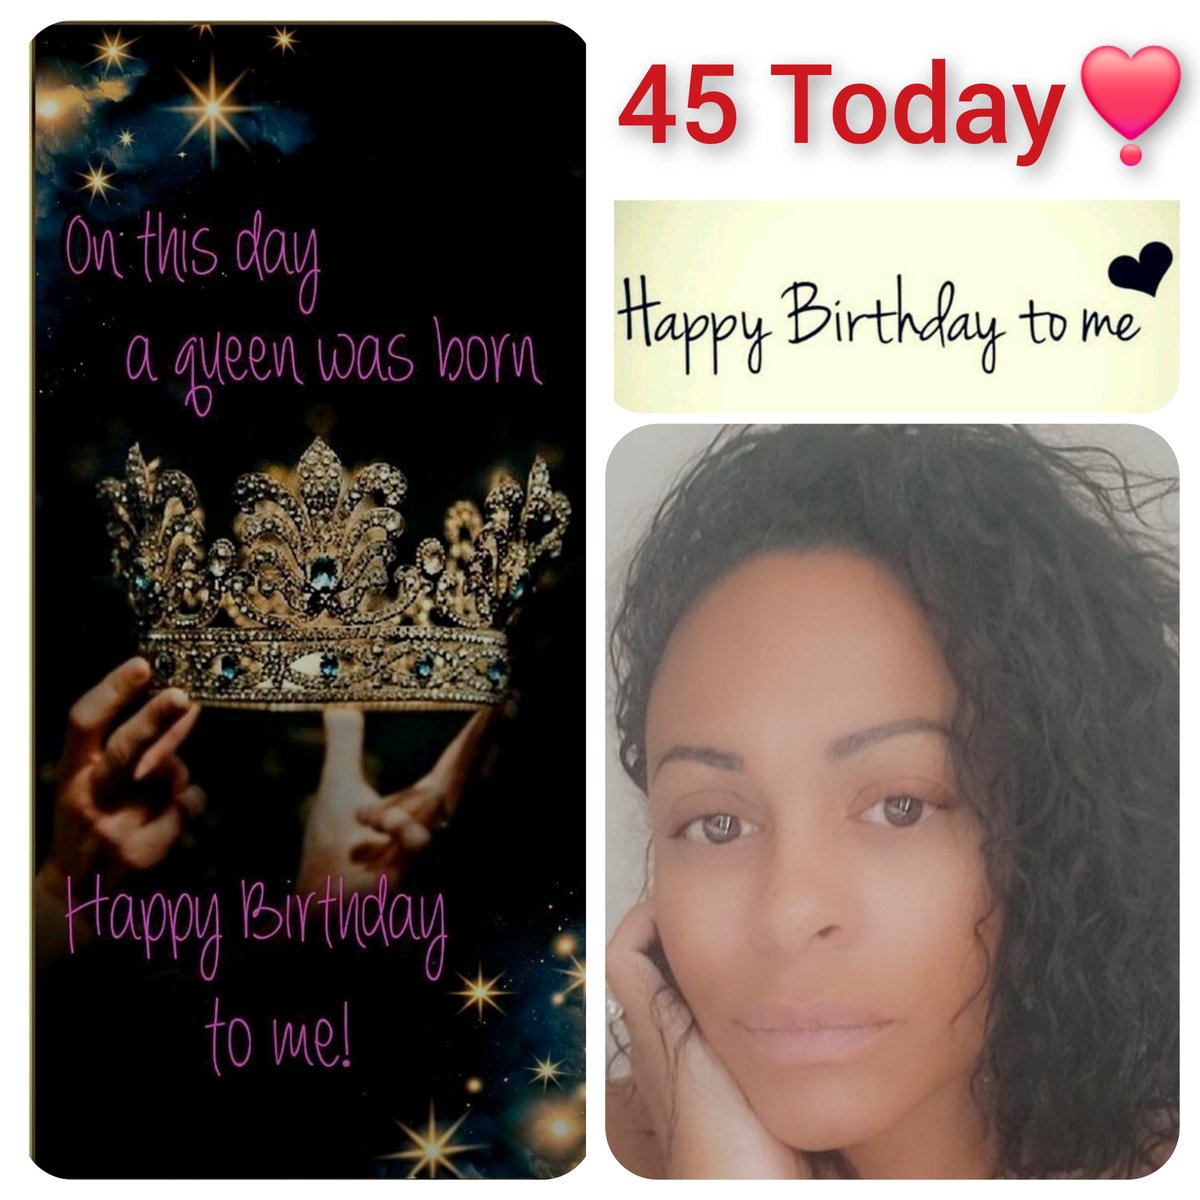 #HappyBirthdayToMe

Today marks my 45th birthday, I express gratitude for another year of life!

Excited for the blessings ahead❣️

#BirthdayReflections #Gratitude #SingleLife #BirthdayGirl #AuthenticityOverPerfection #ChoosingReality #PrioritisingWellBeing #EmbracingTheJourney